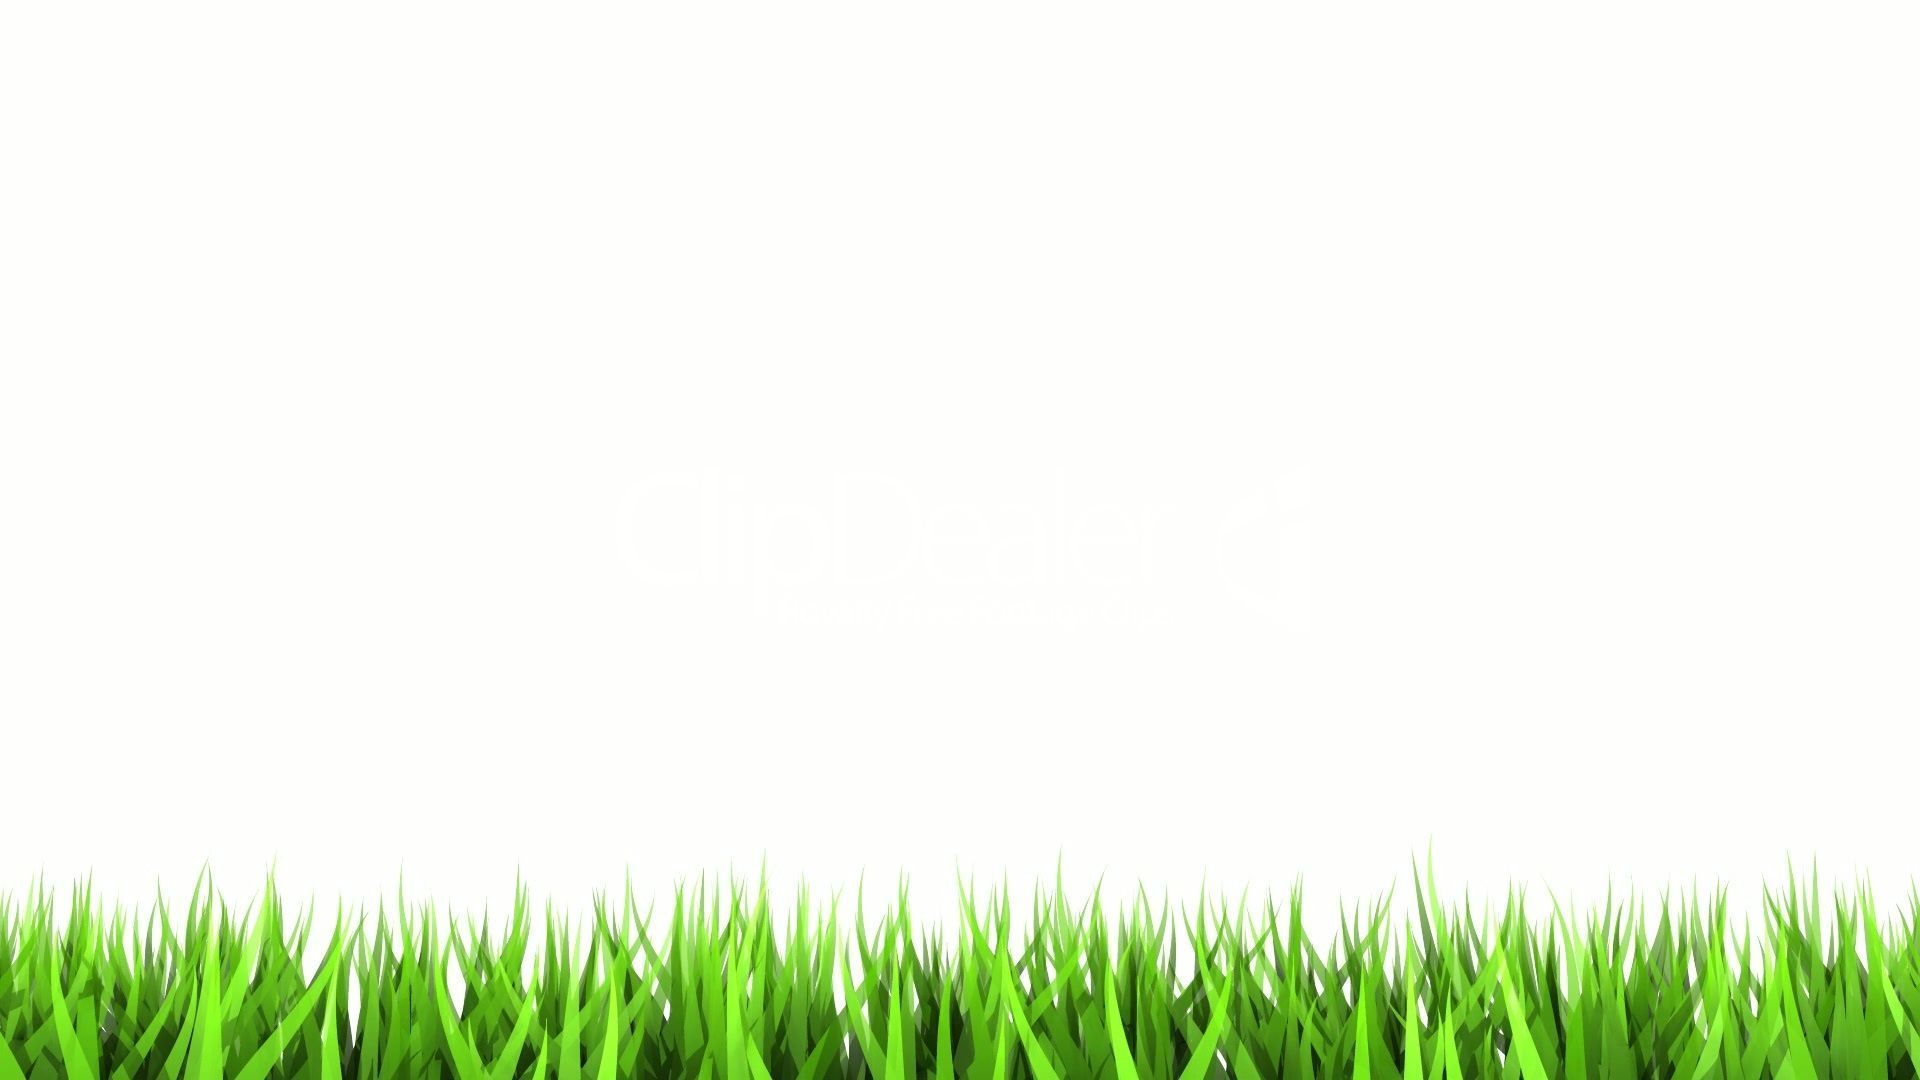 White Background with Green Grass 8199 1920x1080 px ...